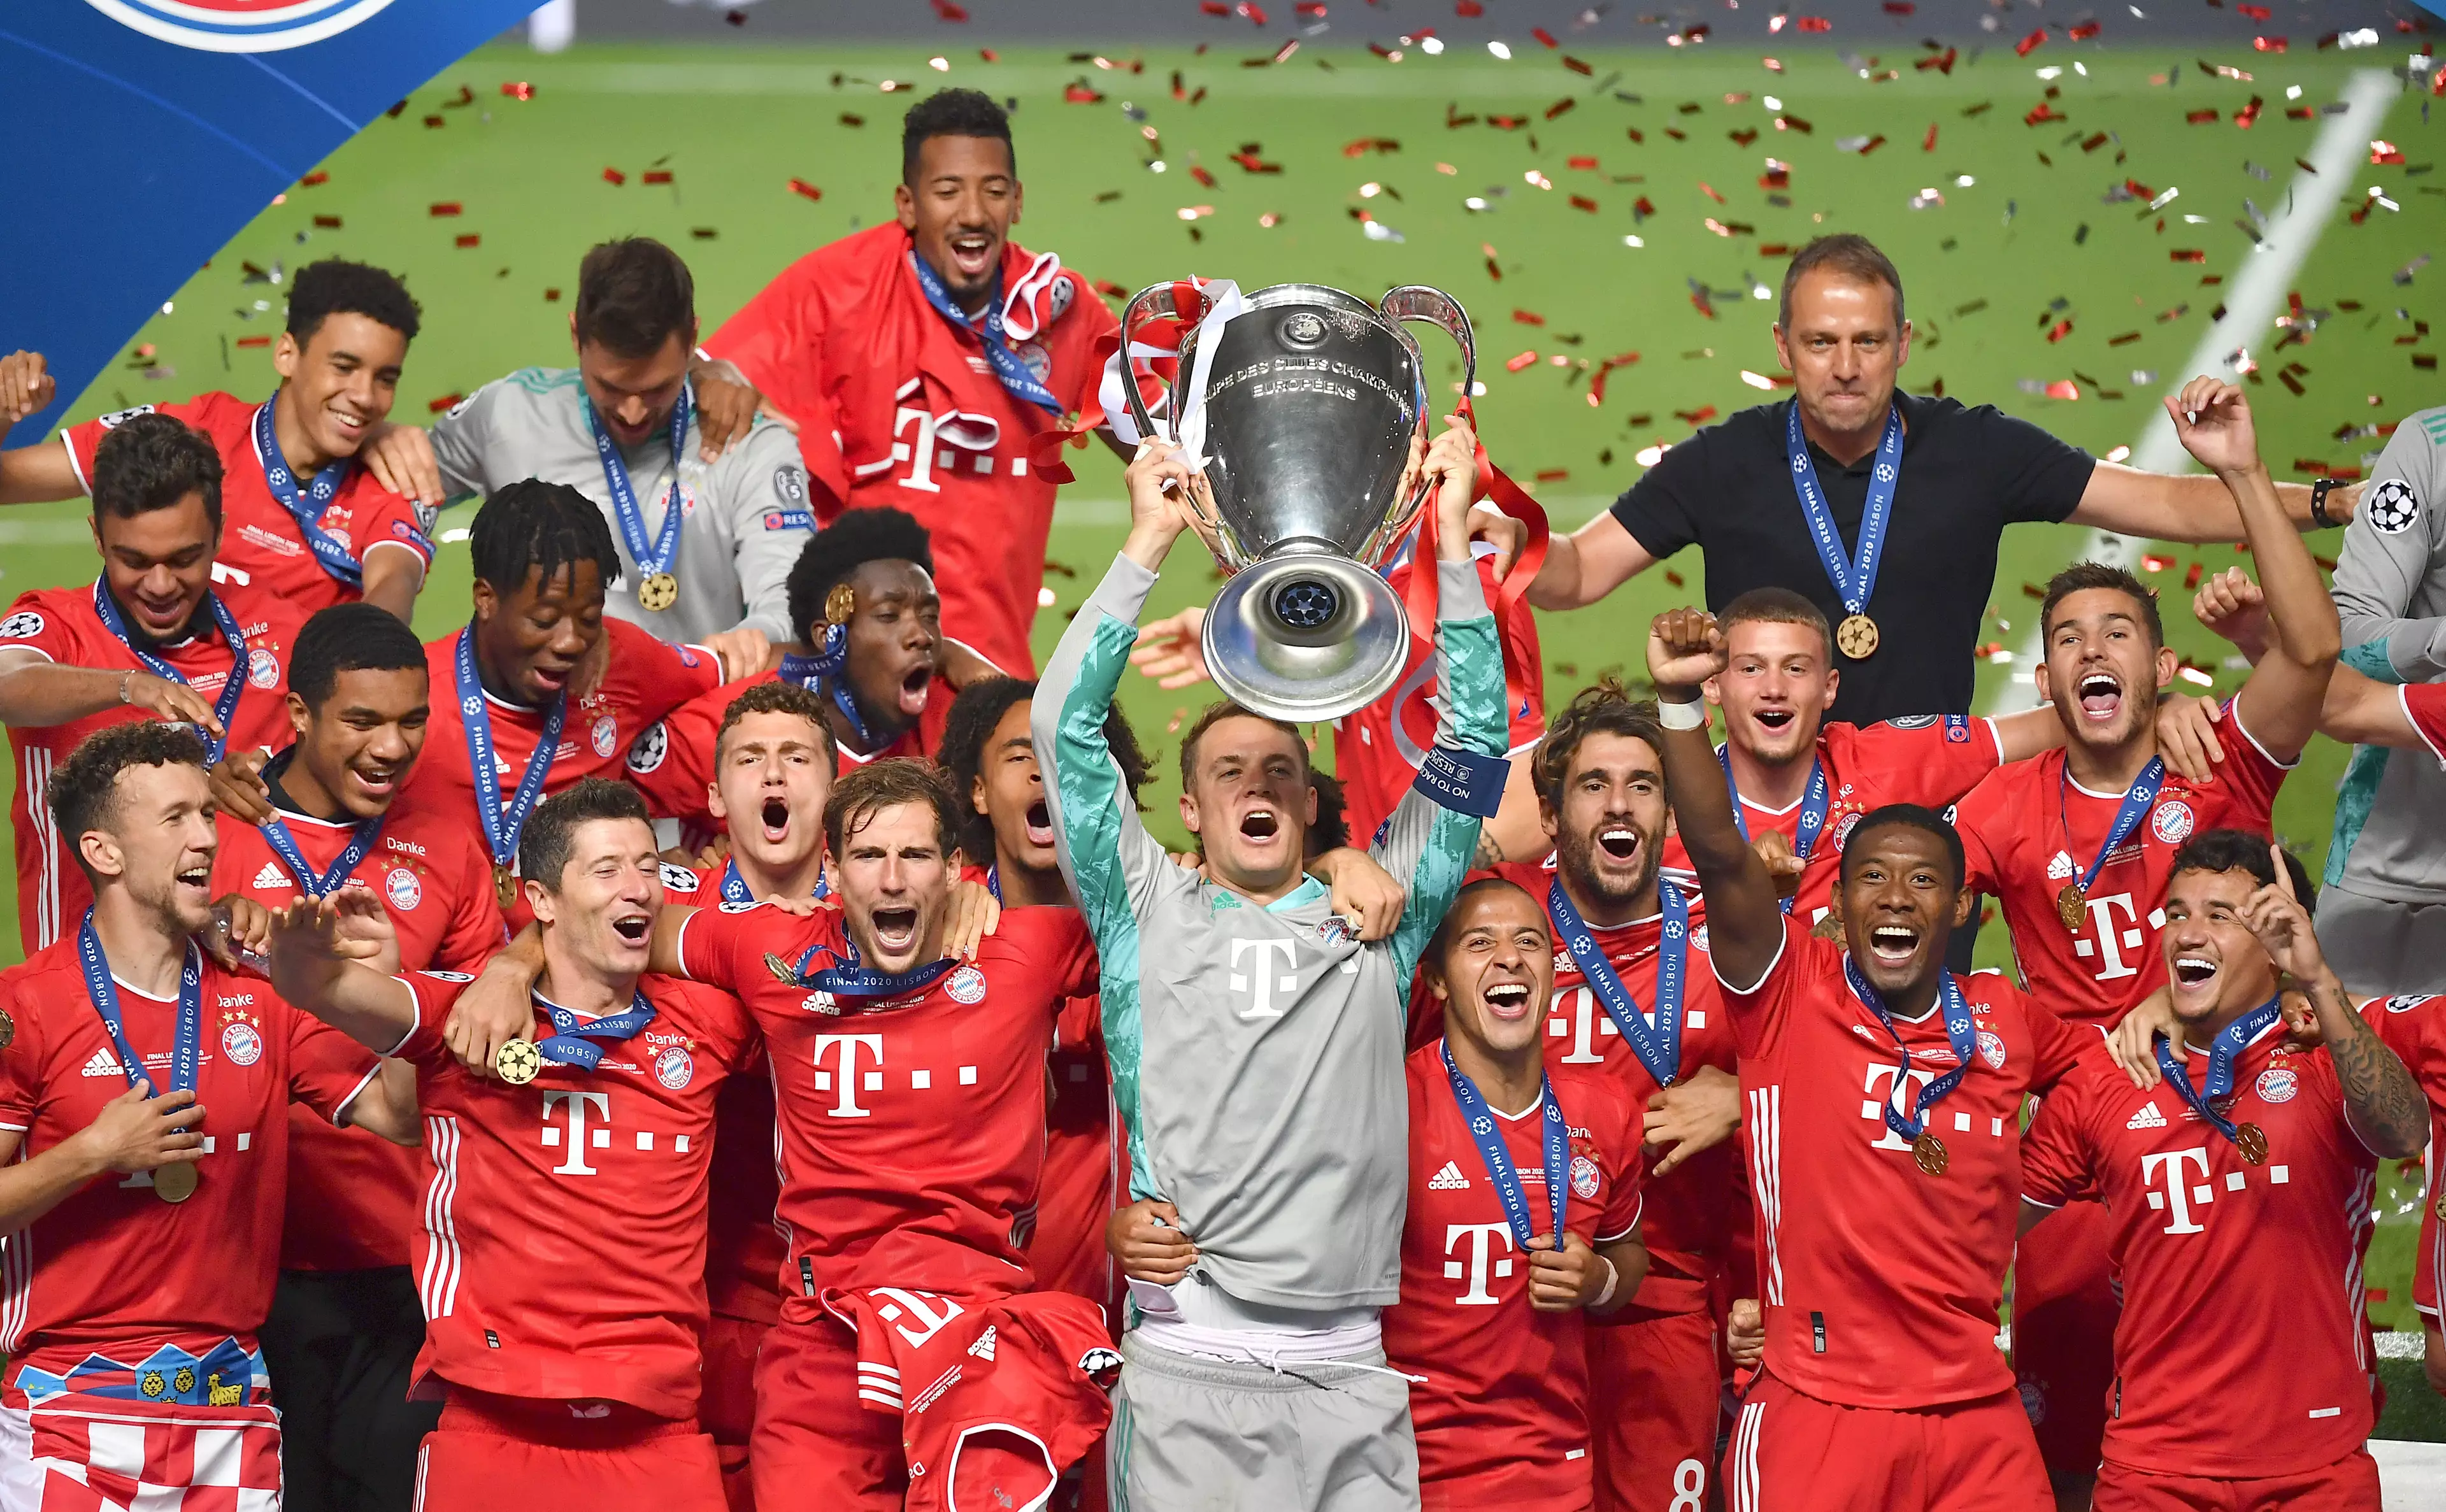 New Champions League Plans Reveal Potential 'Major Shake-Up' To UEFA's Competition